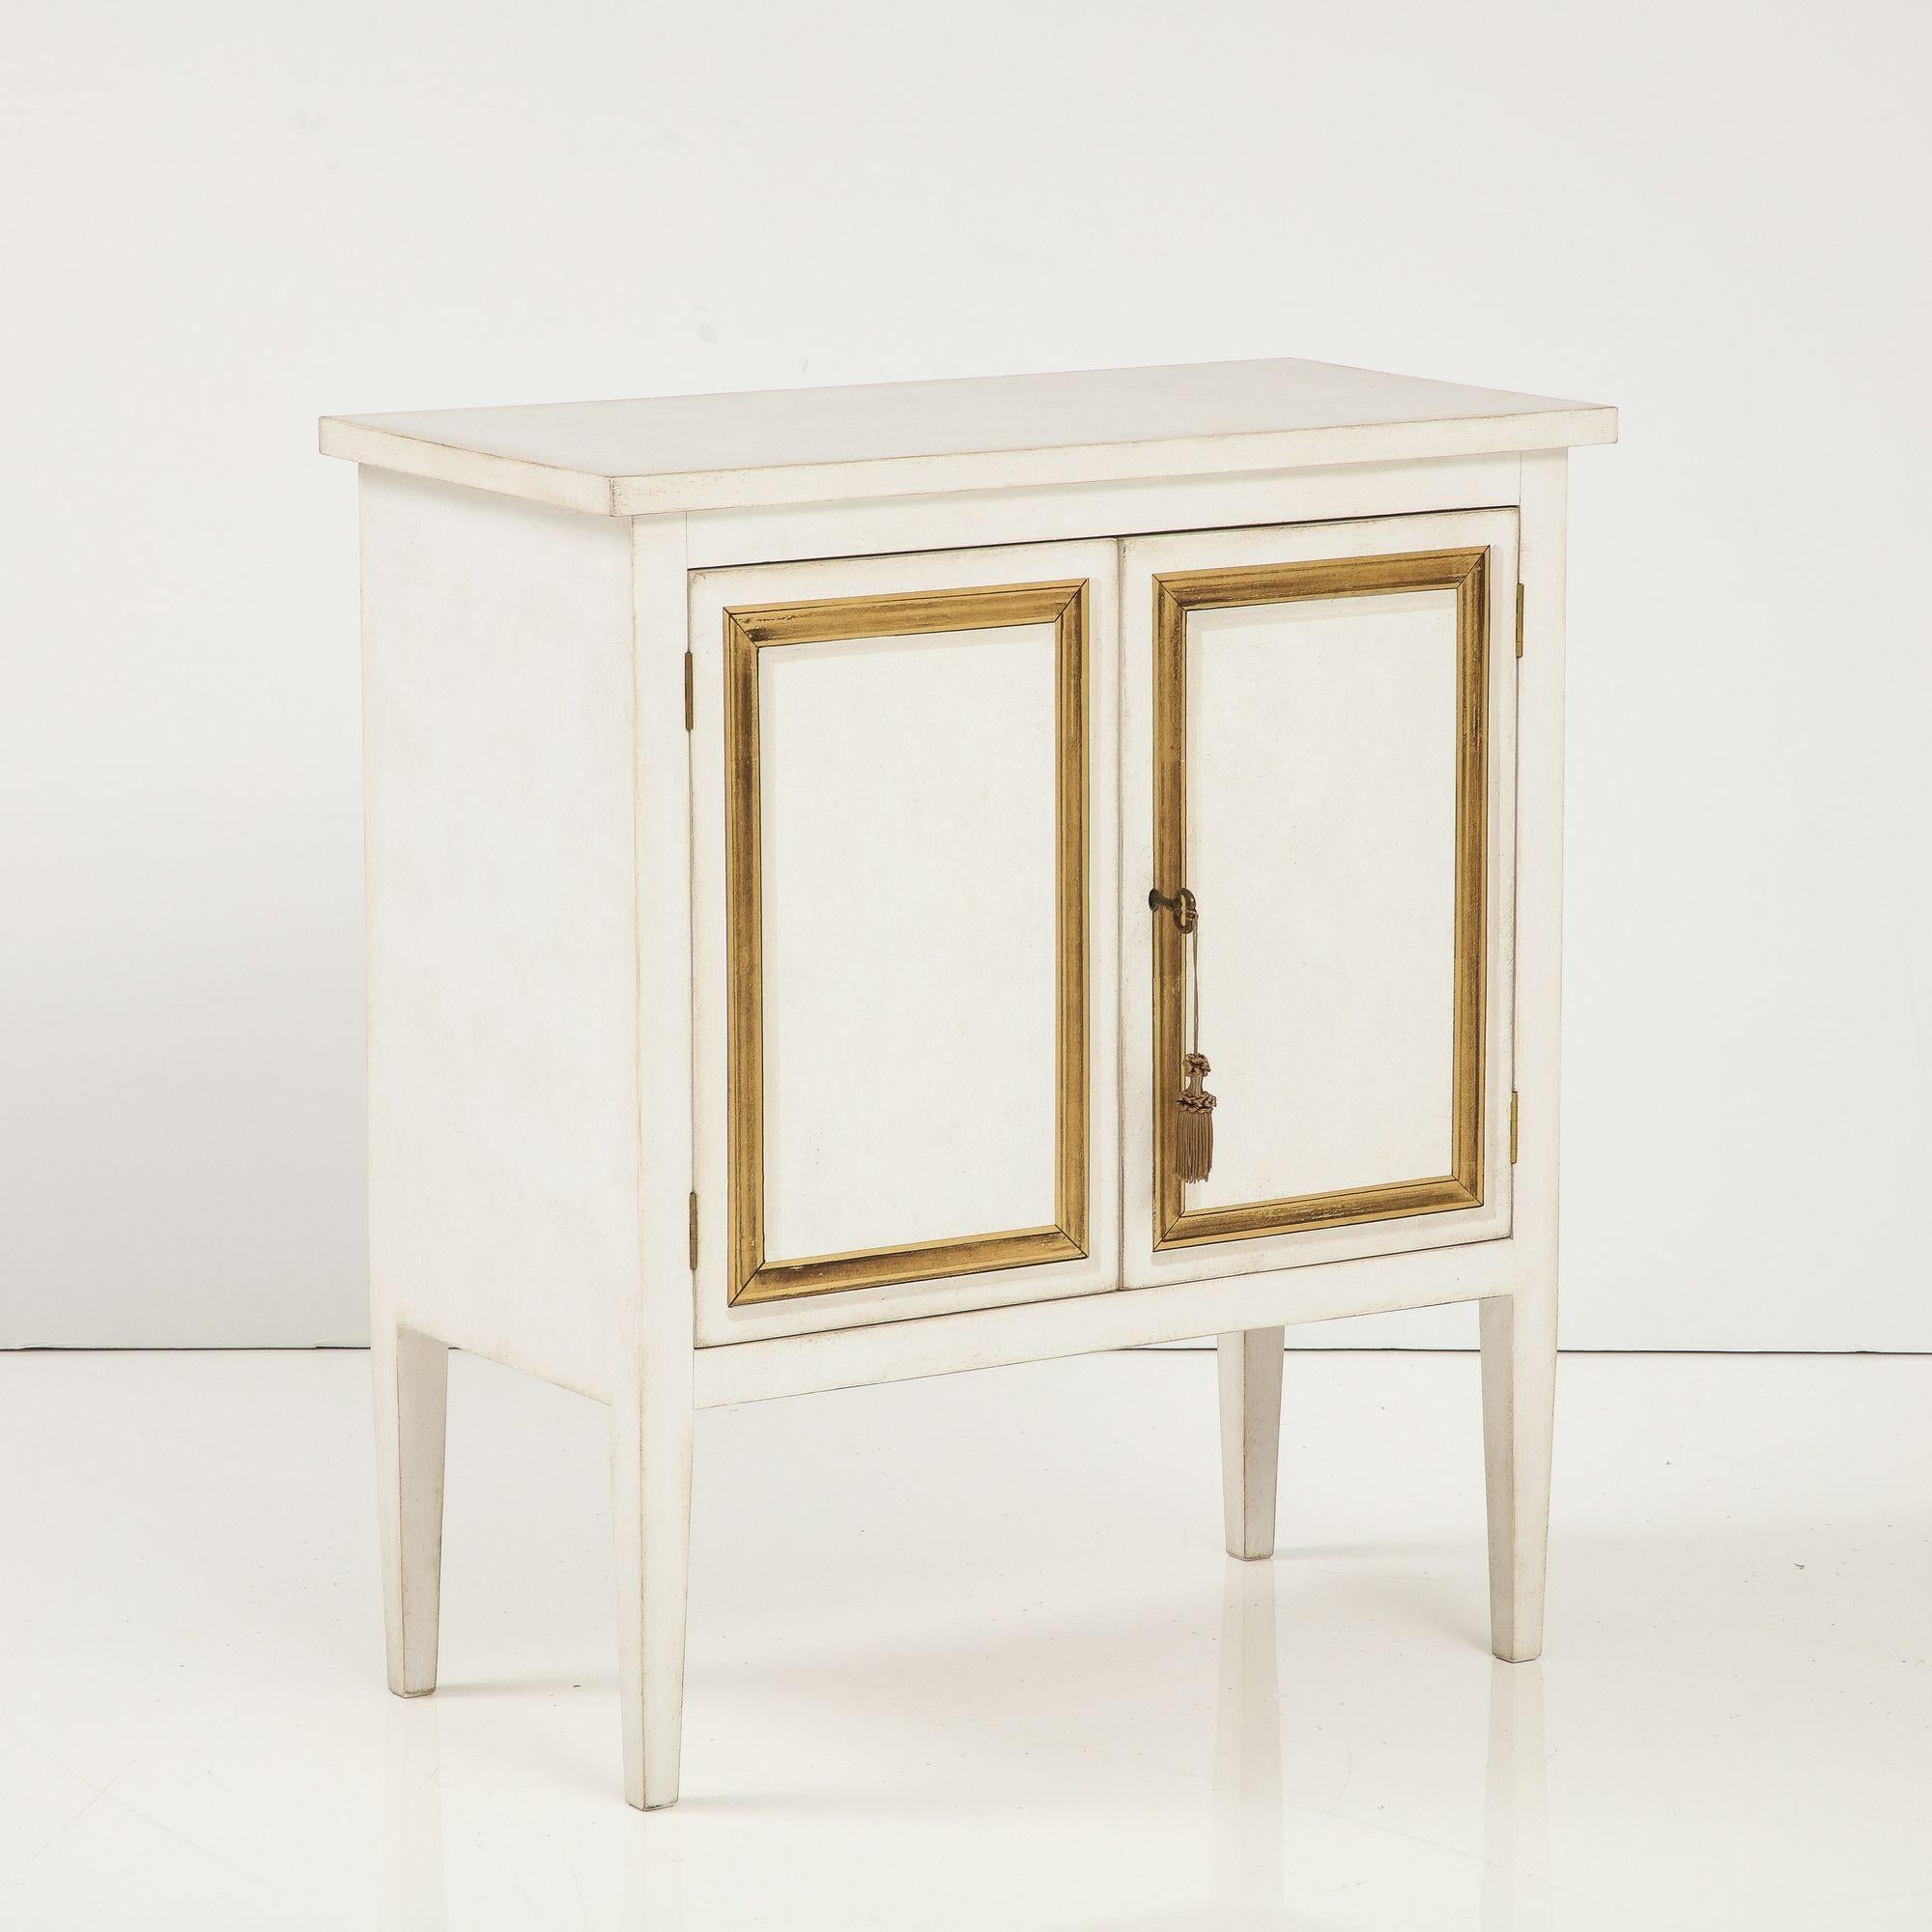 Handpainted Ivory and Gold Trompe l'oeil Cabinet or Nightstand, 21st C. For Sale 3